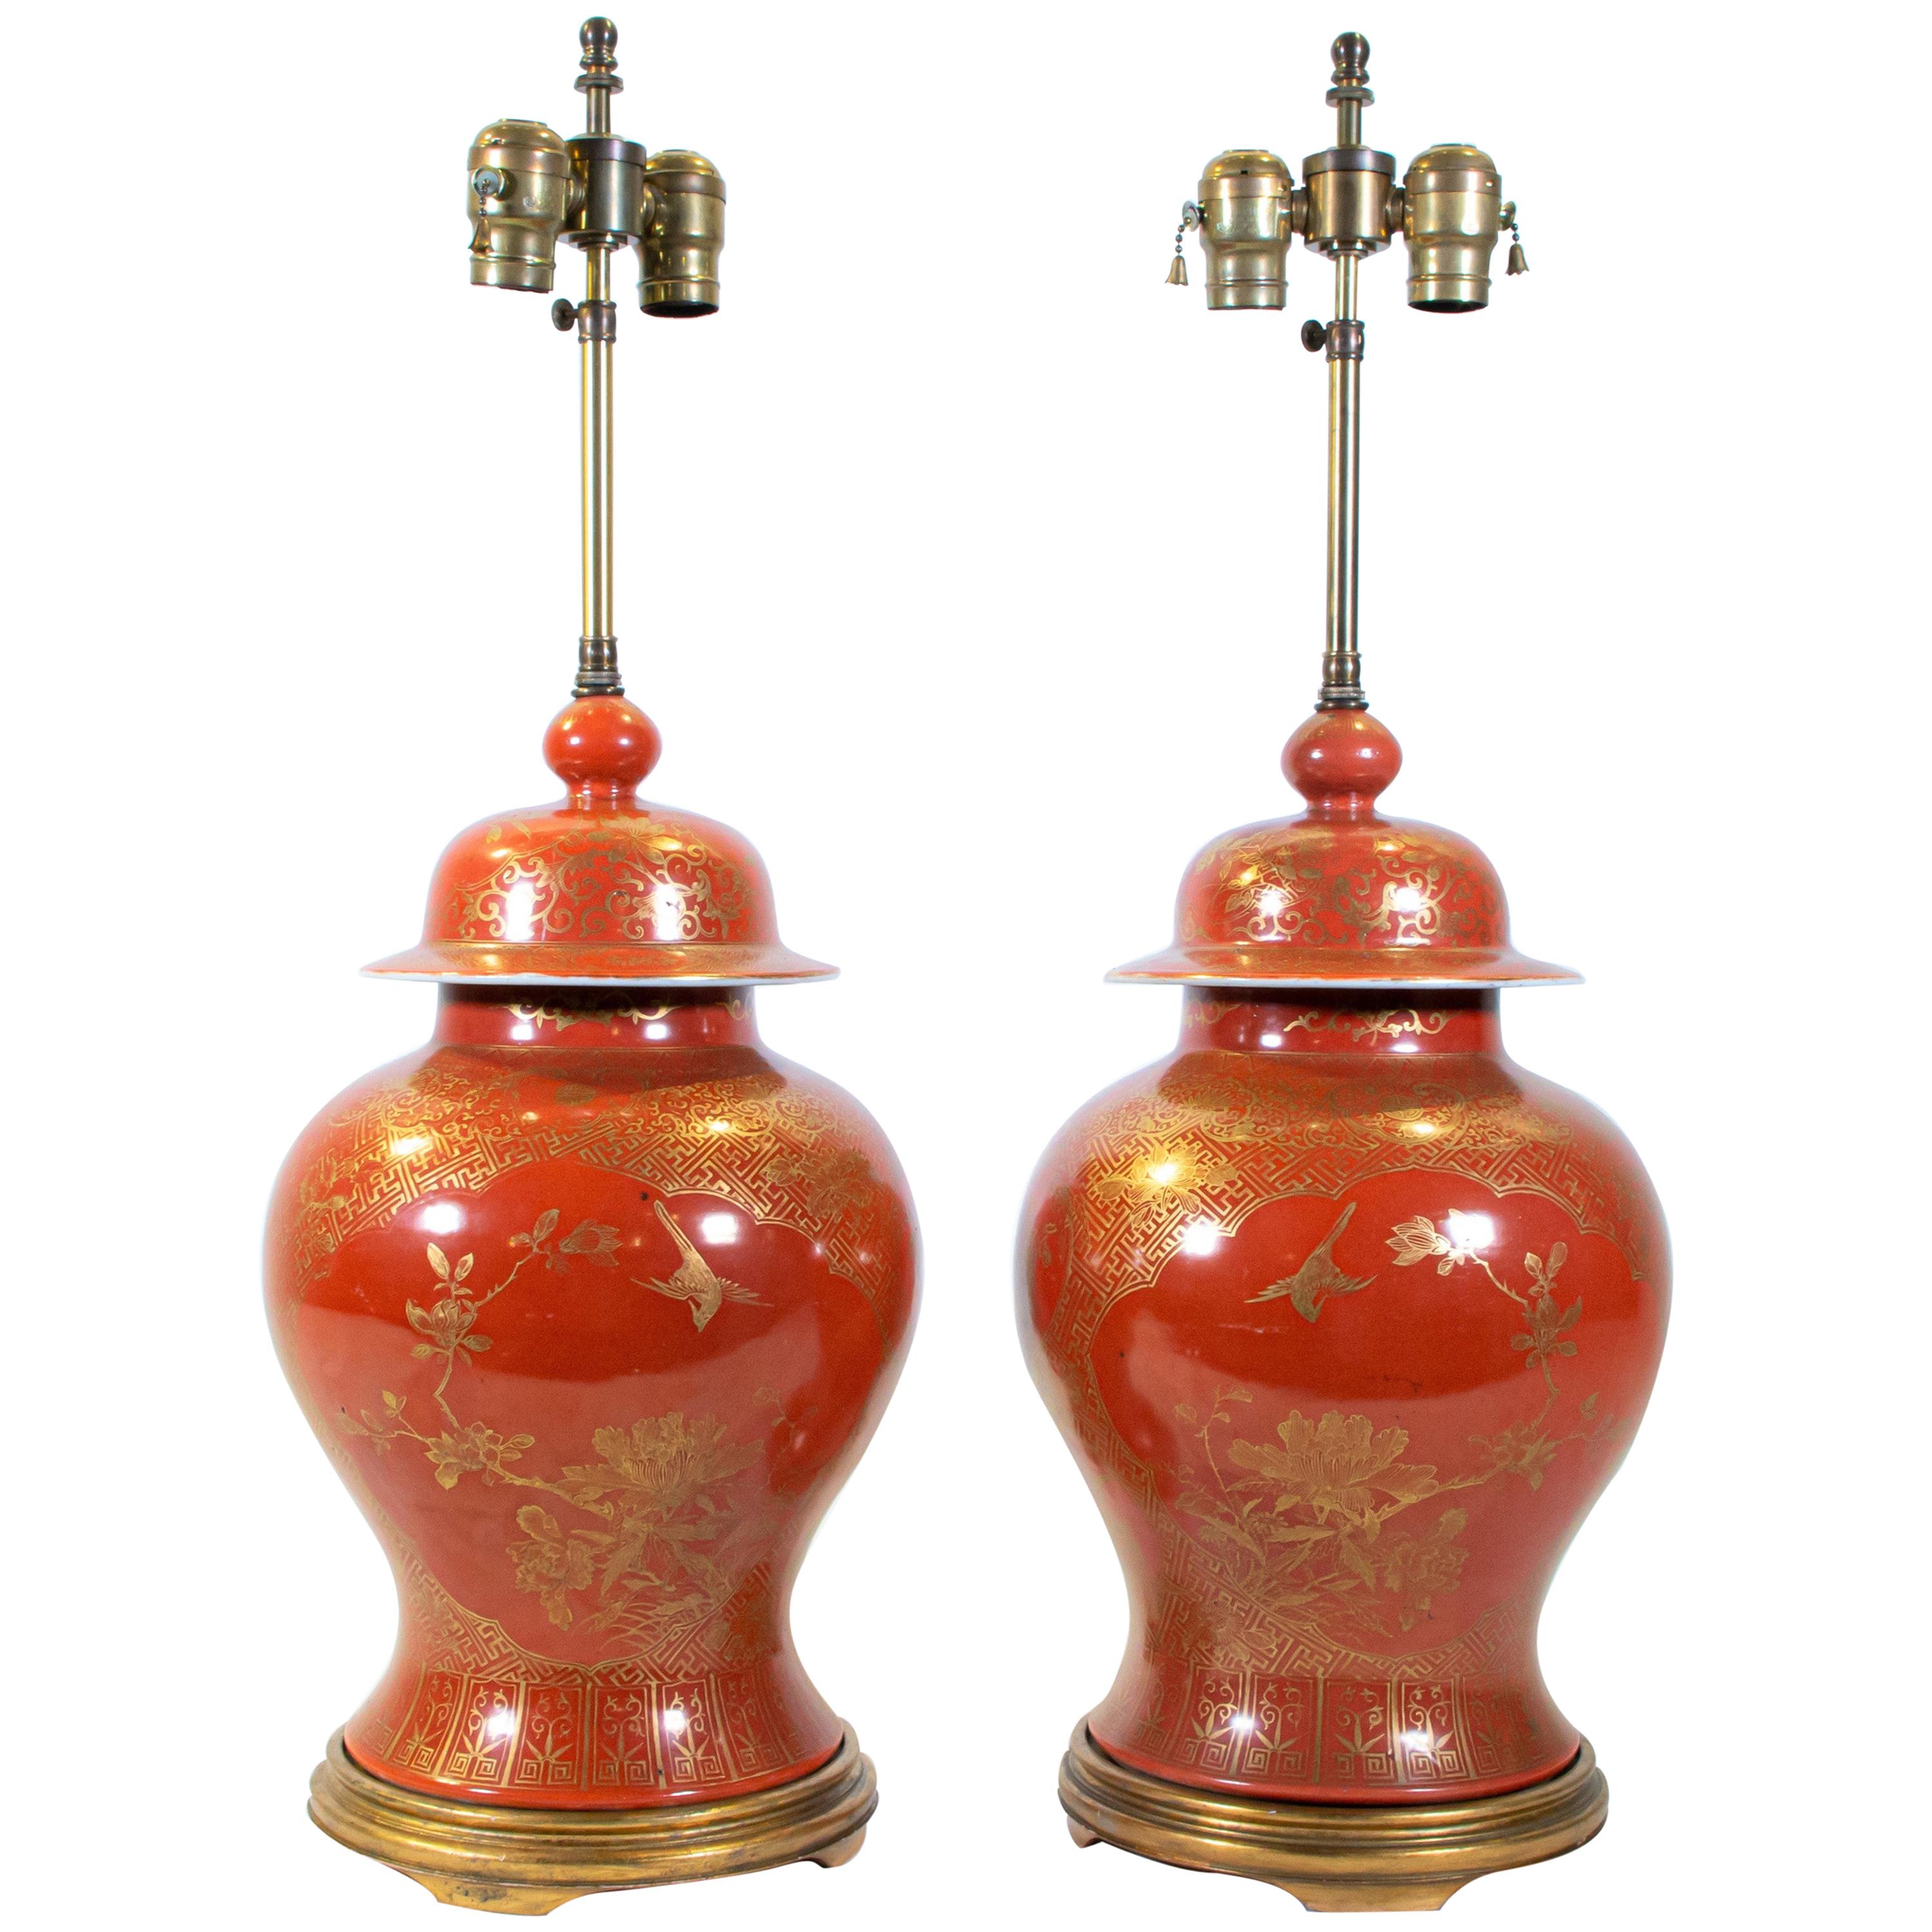 Fine pair Antique Chinese Export Orange Ground & 24K Gilt Vases Turned to Lamps For Sale